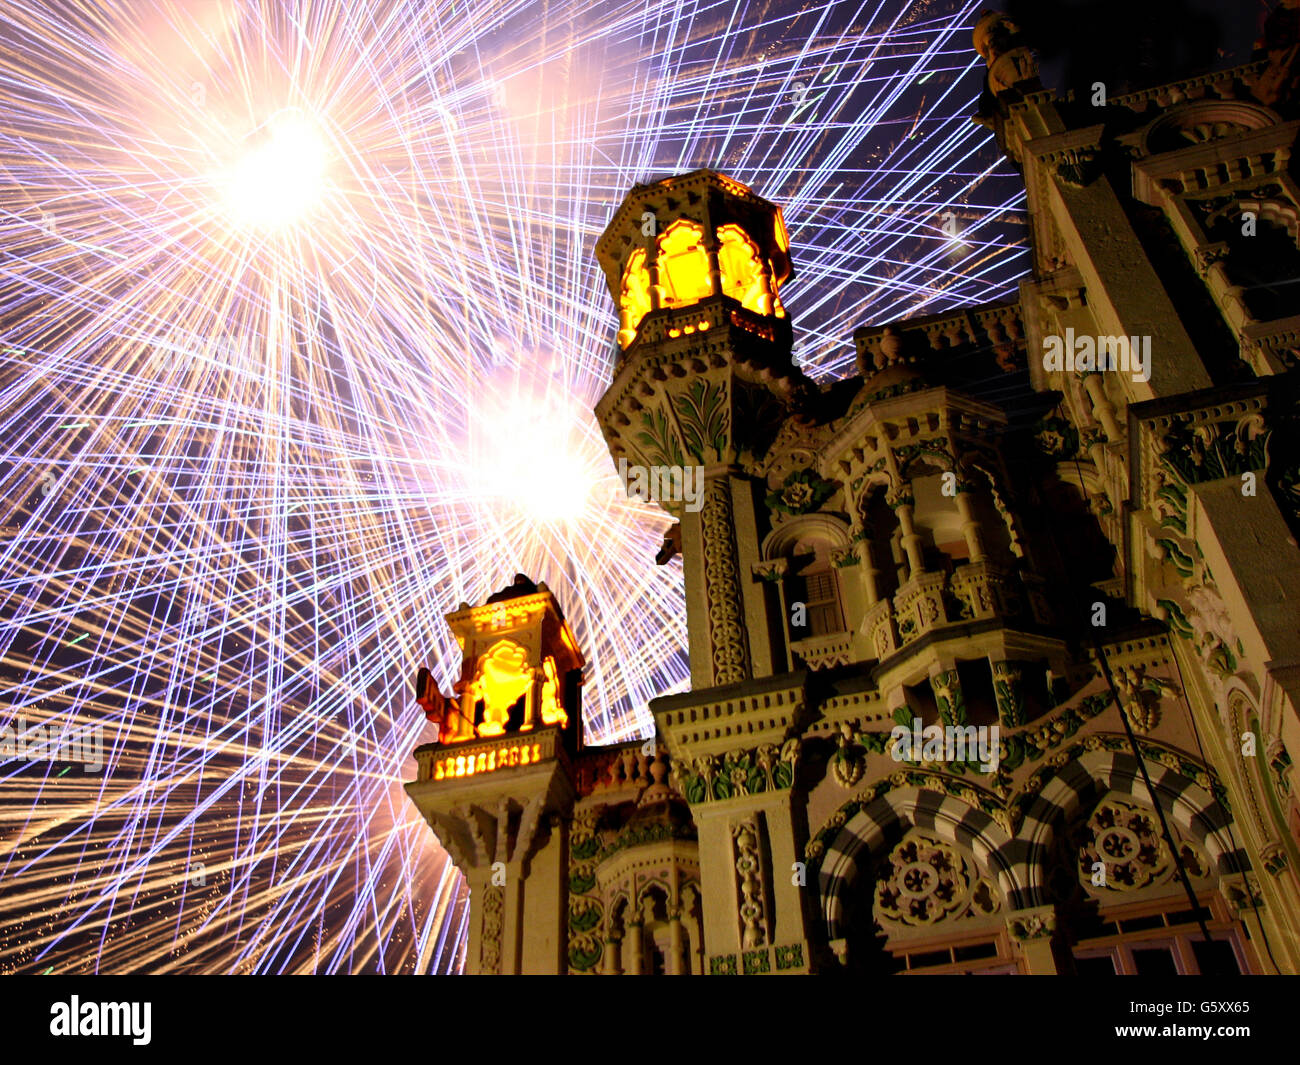 Fireworks behind a royal palace in India, on the occassion of Diwali festival. Stock Photo